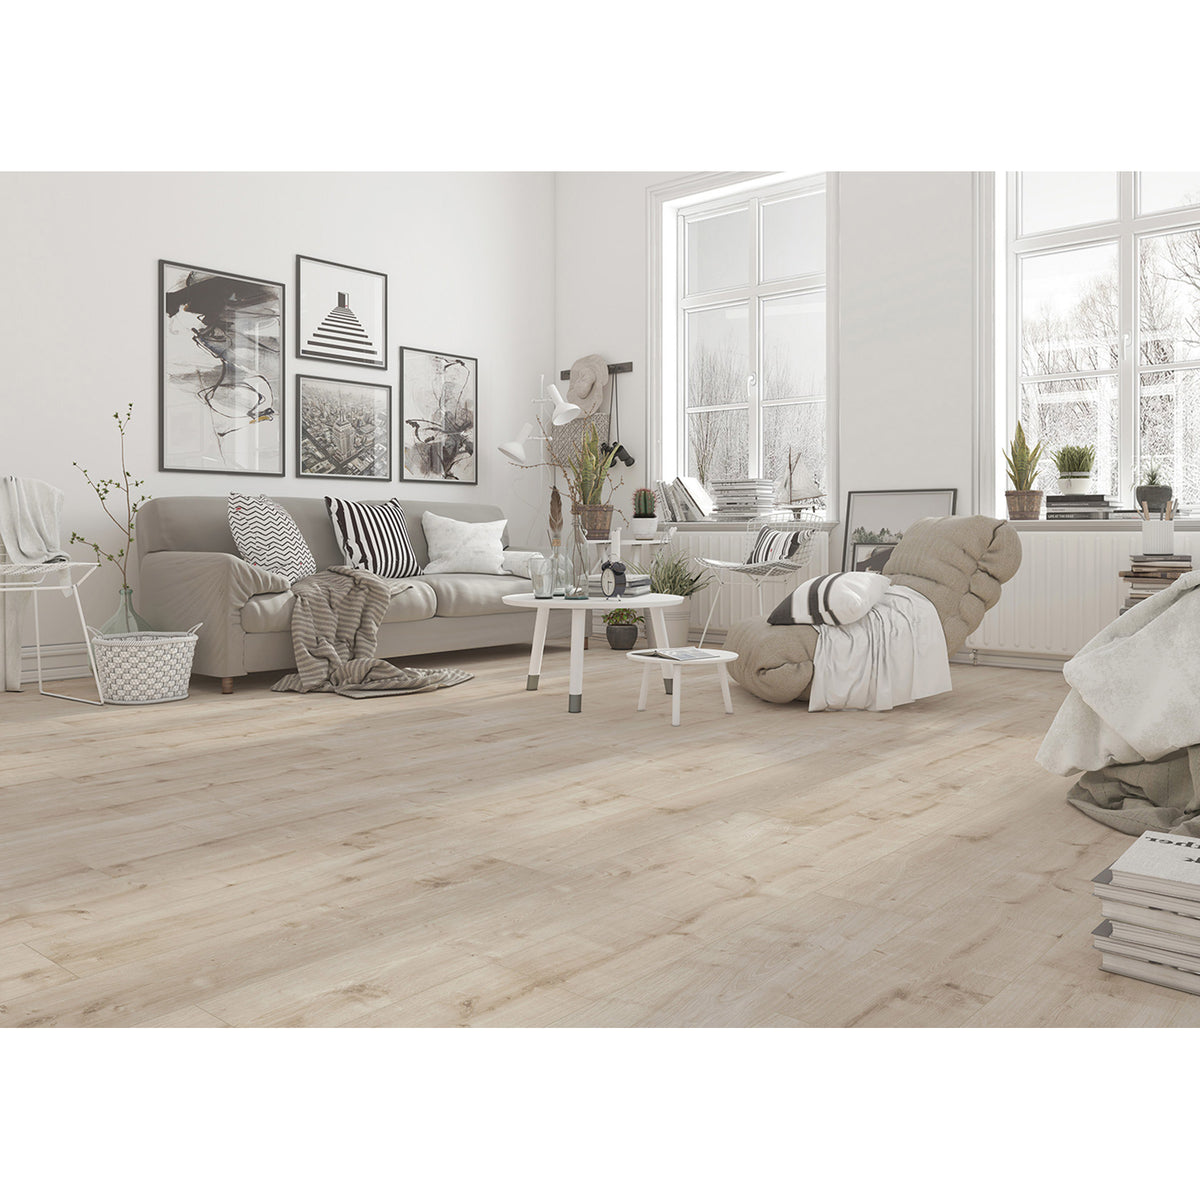 Inhaus - Solido Visions Collection - Natural Oak Room Scene